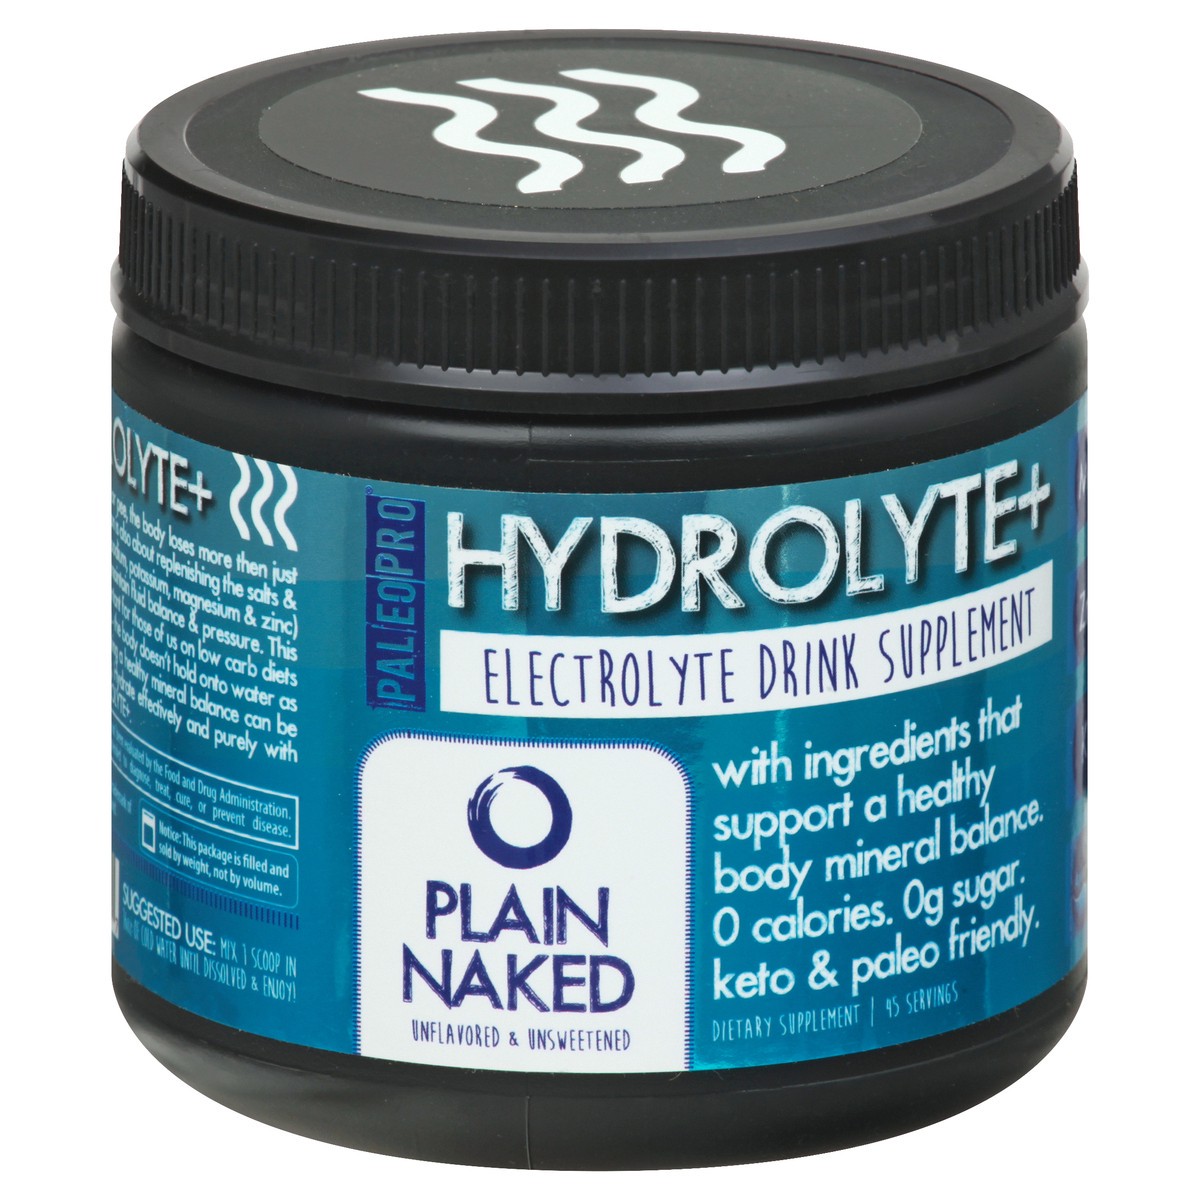 slide 9 of 13, Hydrolyte + Electrolyte Unflavored & Unsweetened Plain Naked Drink Supplement 1 ea, 6.3 oz